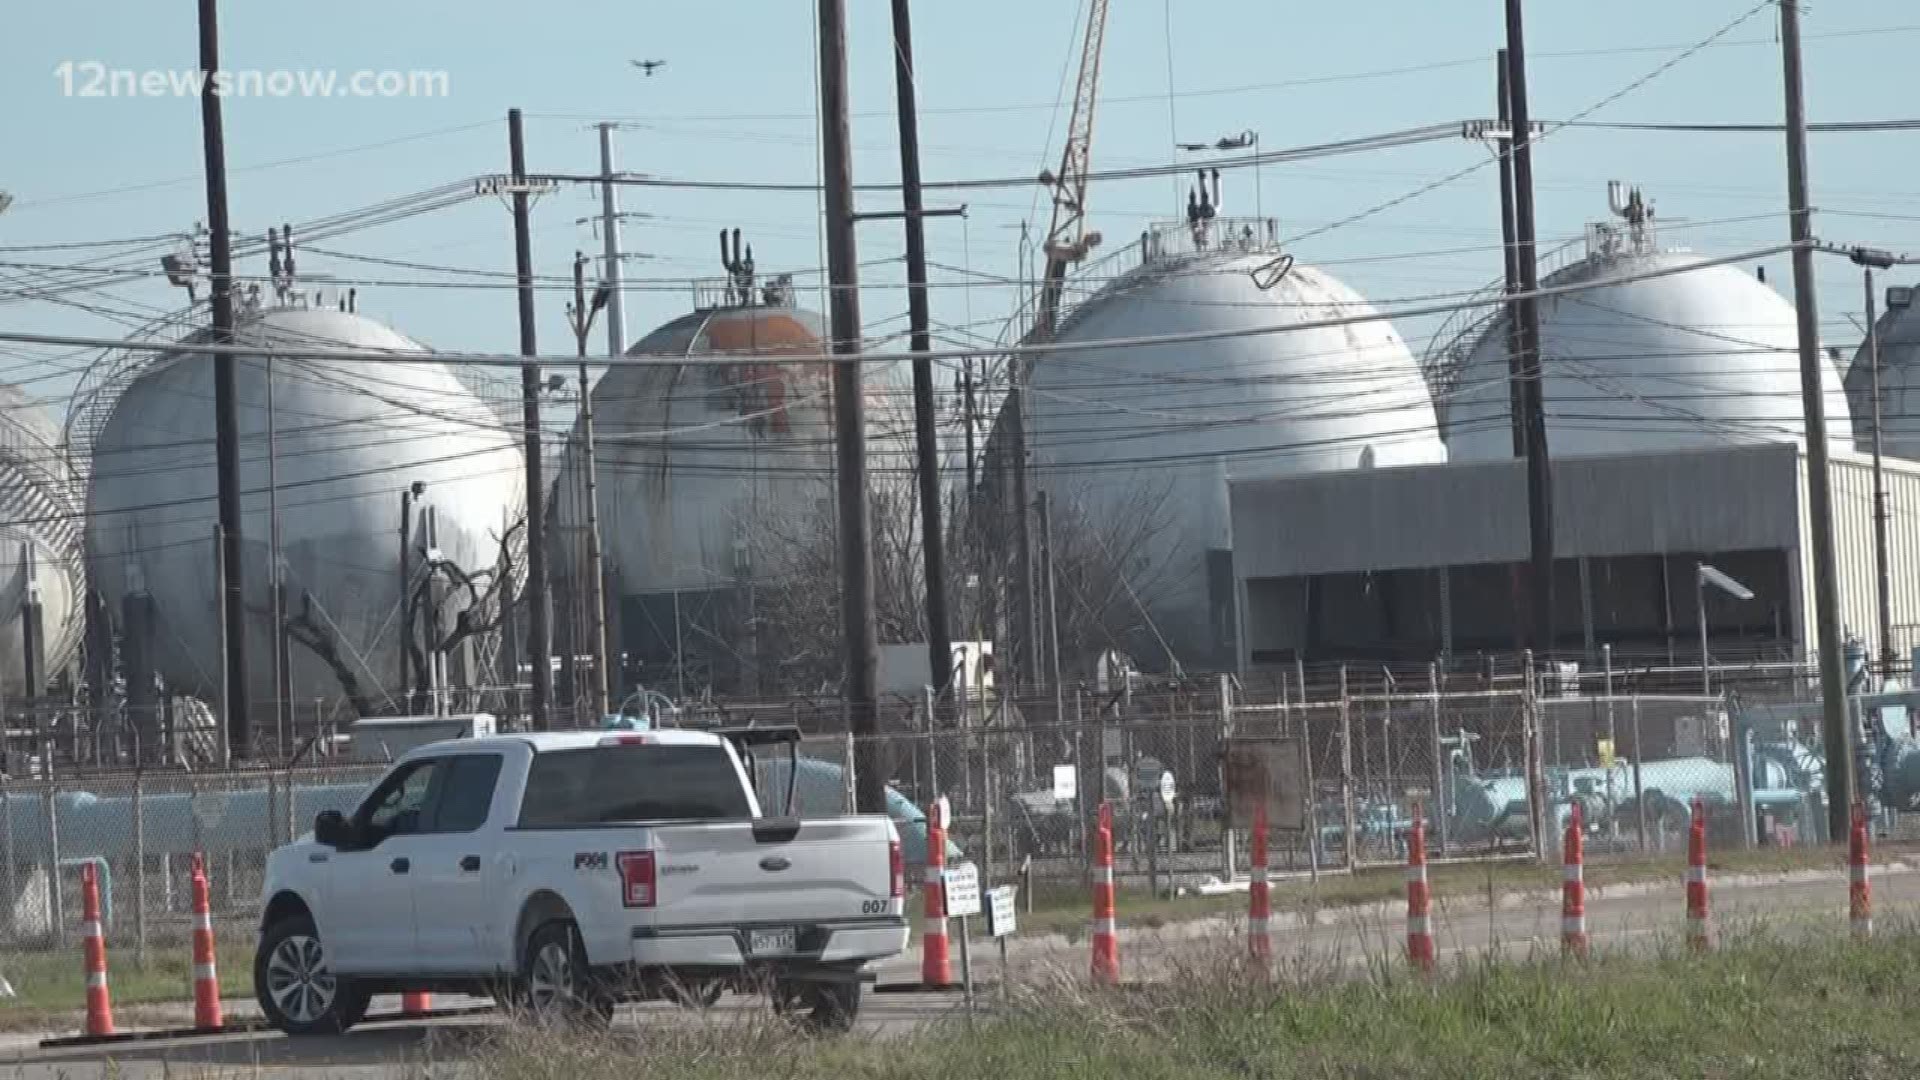 Some say they're stressed, not knowing if they'll be able to work in Port Neches day-to-day